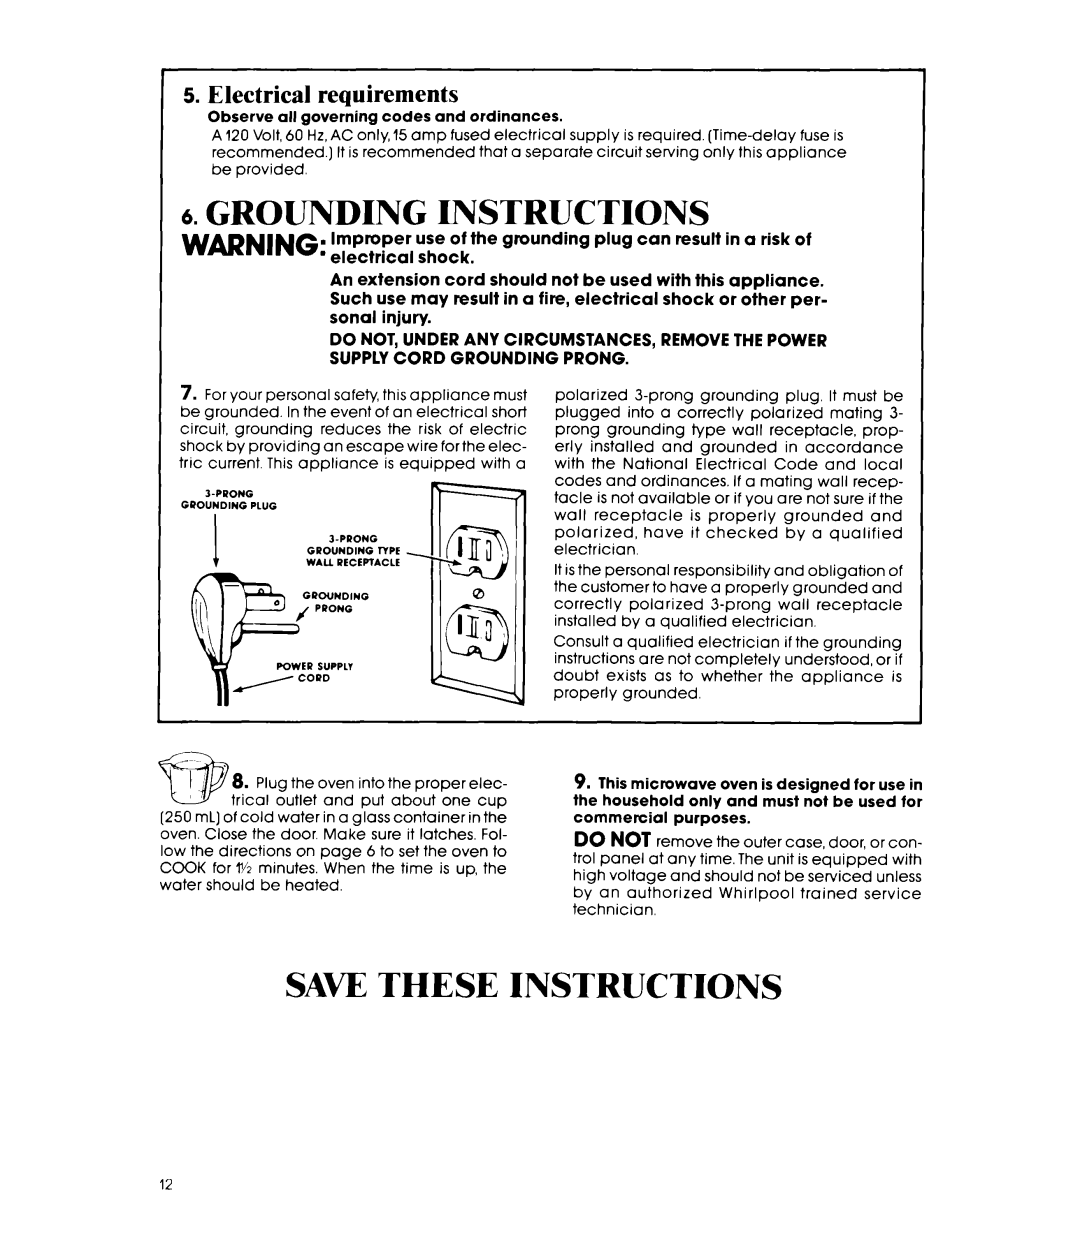 Whirlpool MW8450XP manual Grounding Instructions, Saw These Instructions, Electrical requirements 